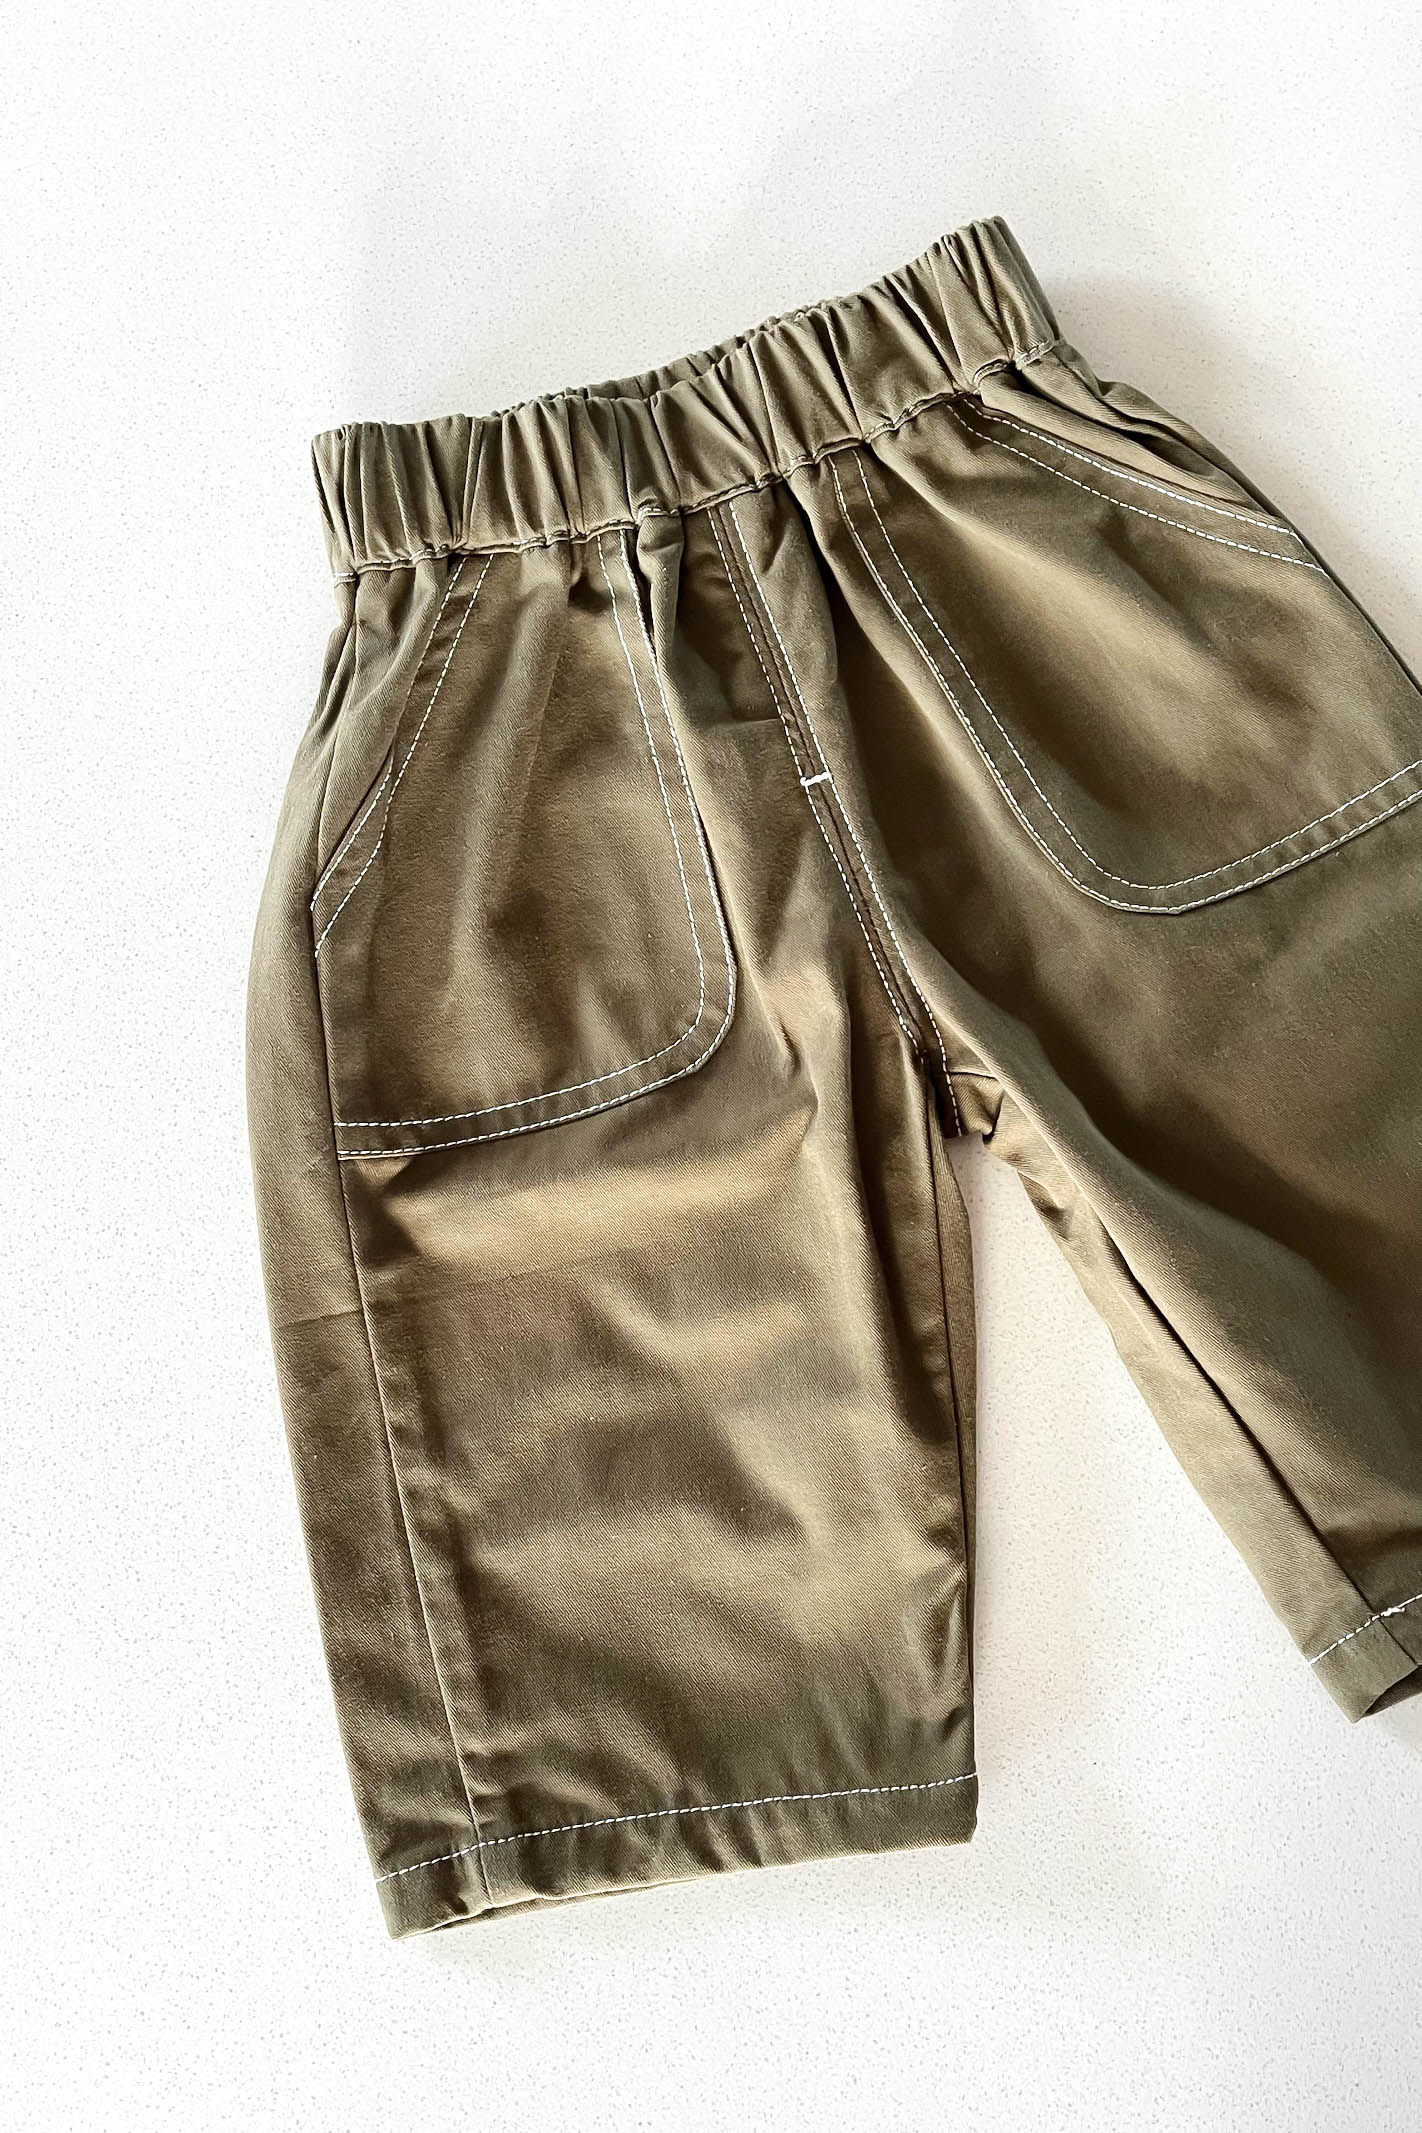 Toddler Olive Cargo Pants